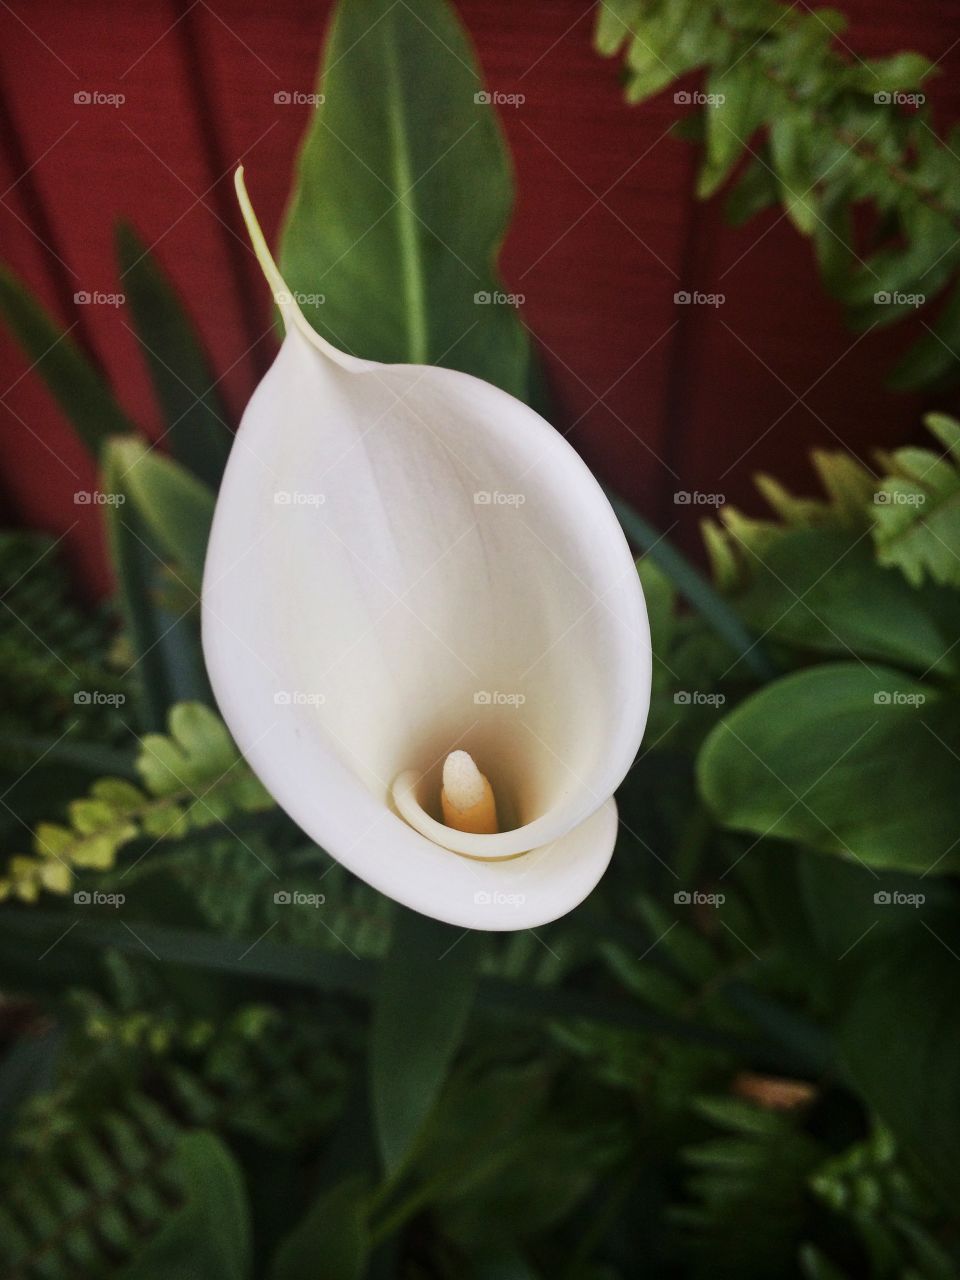 I'm amazed by the simple, yet striking, beauty of the Calla Lily 